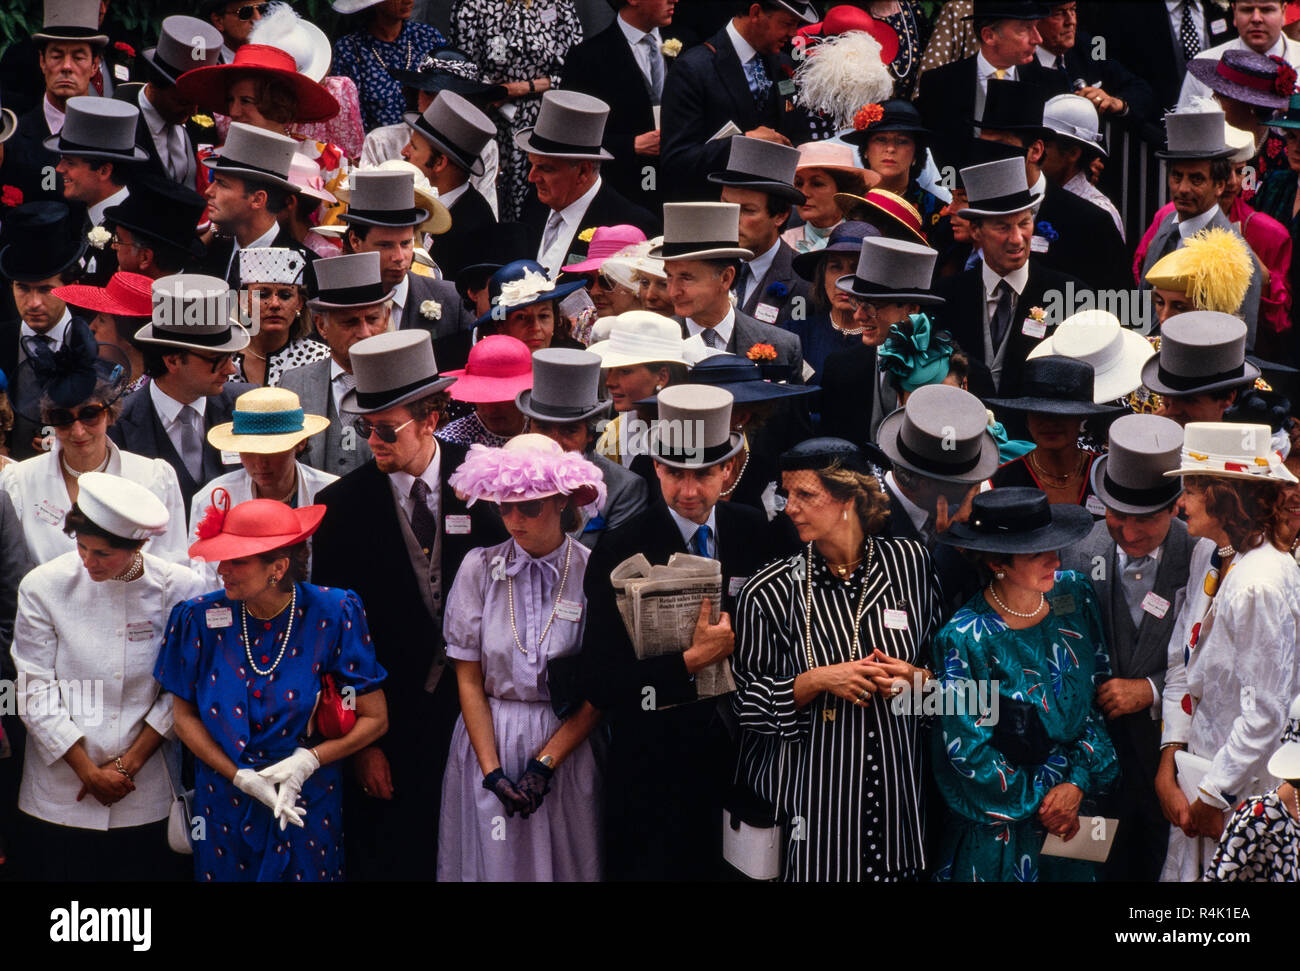 Ascot Races England UK 1986 scanned in 2018 the British Royal Family arrive and walk about at Royal Ascot in 1986 Members of the public dressed in fine hats and top hats and Tails for the men at Royal Ascot. Stock Photo